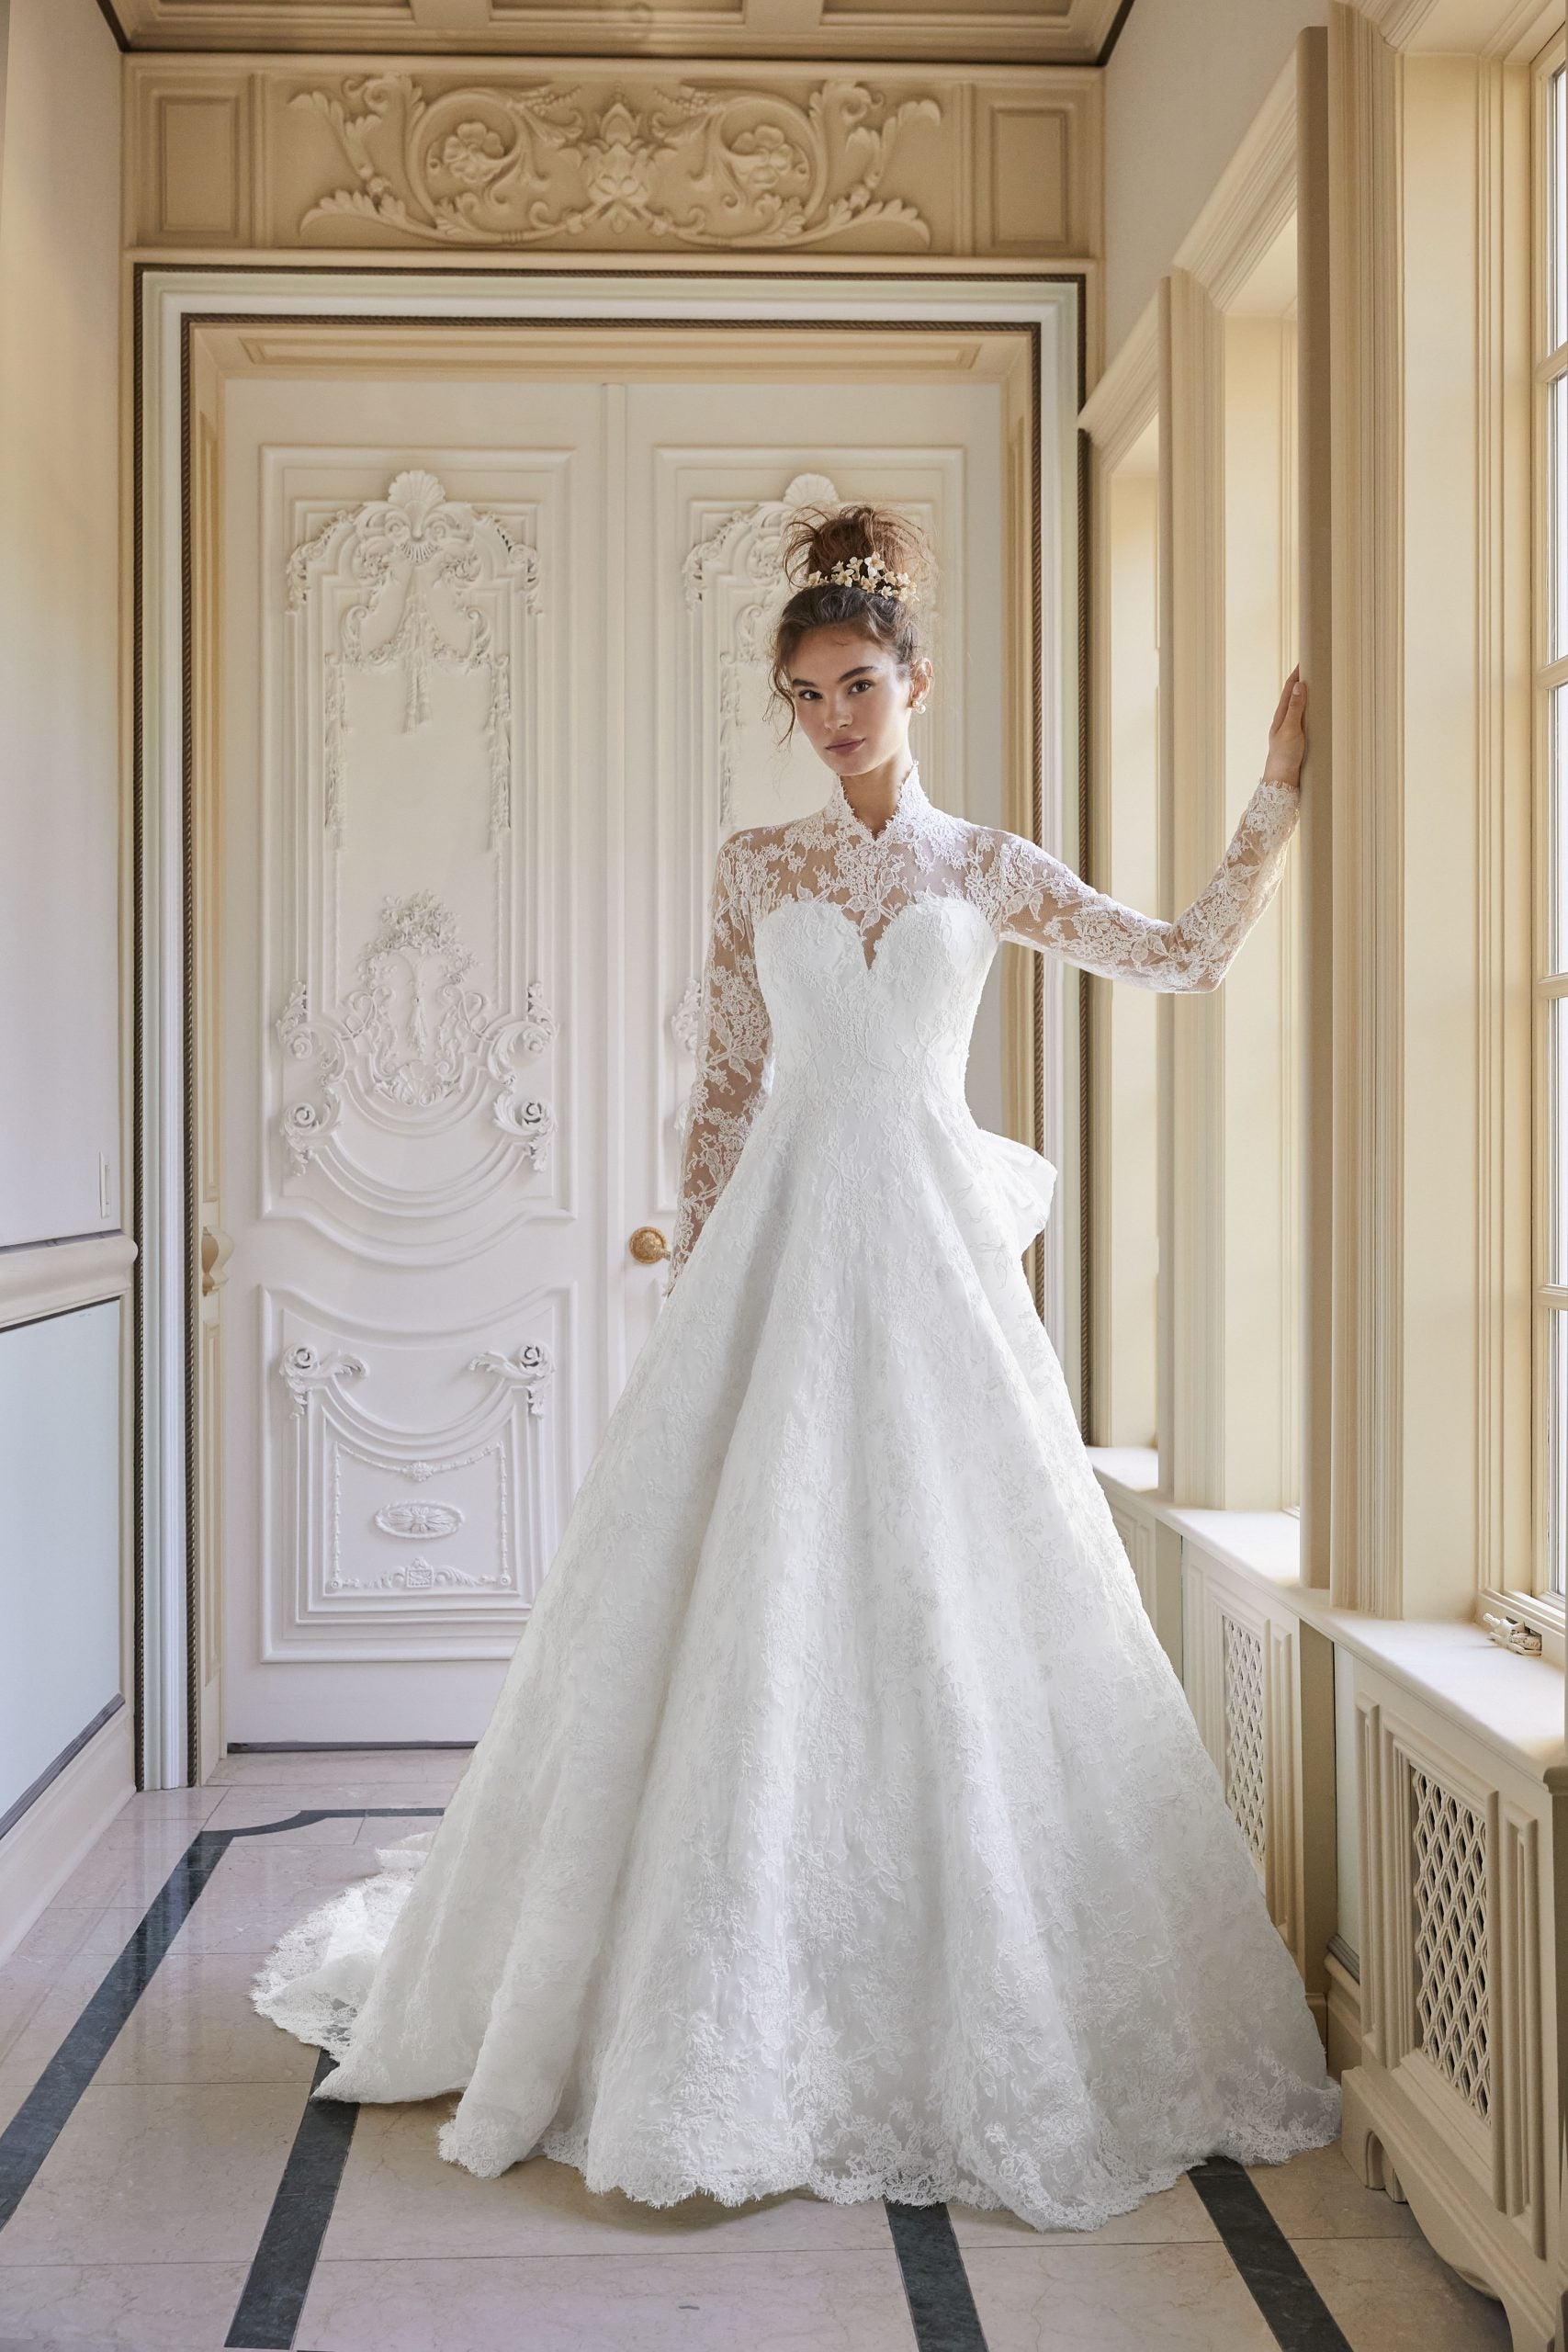 Lace Long Sleeve Ball Gown by Sareh Nouri - Image 1